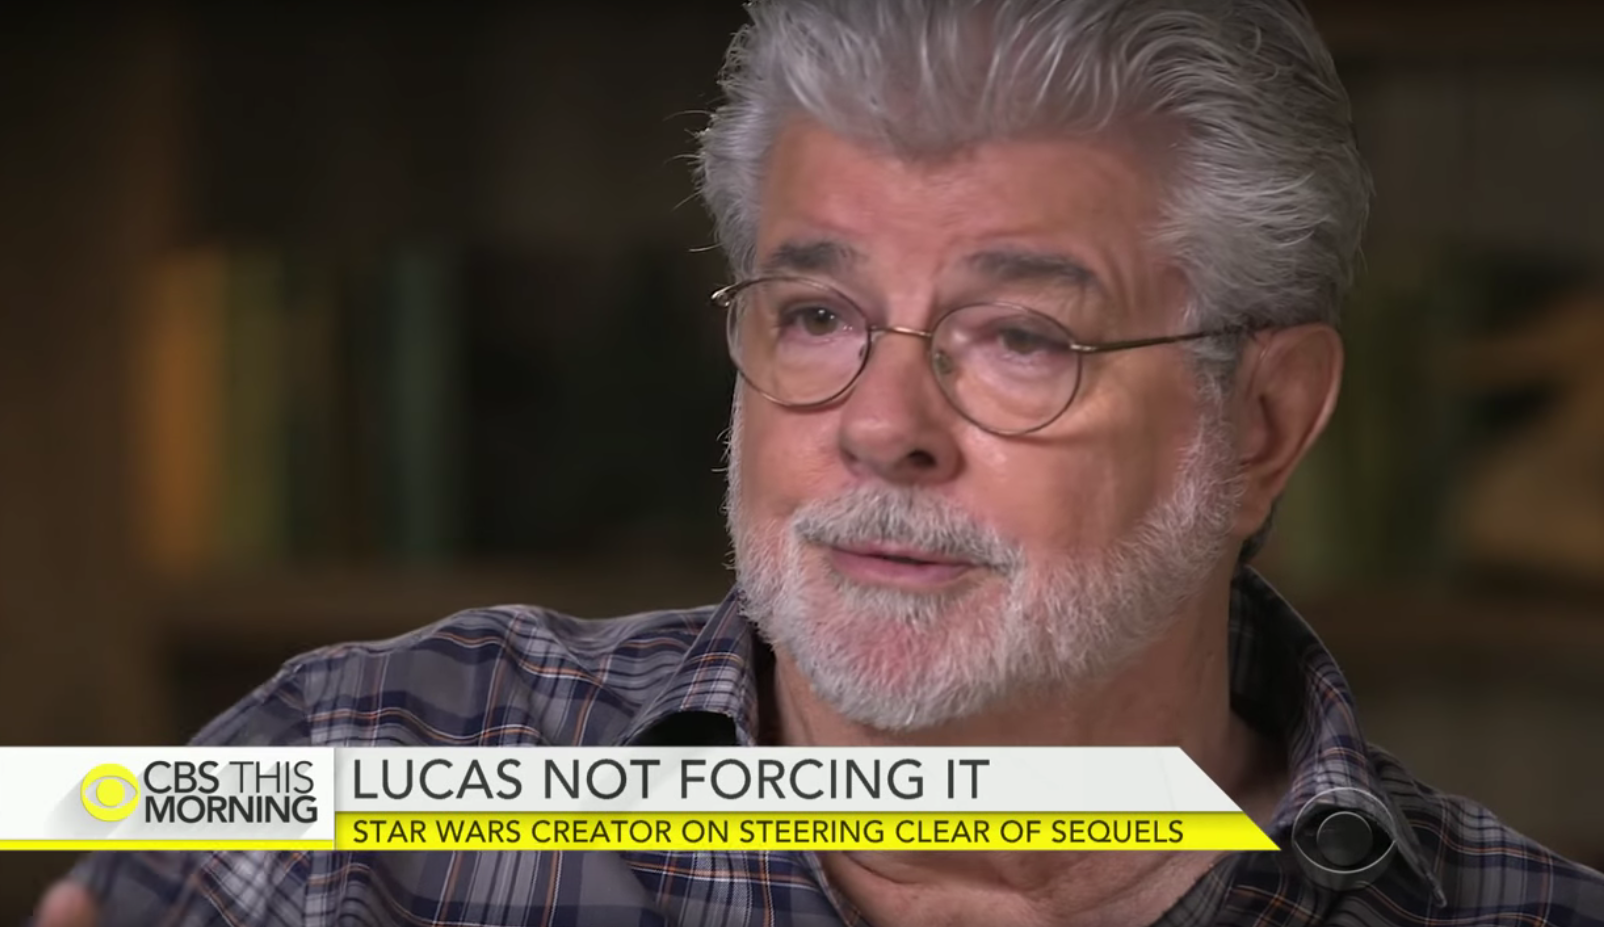 George Lucas on CBS This Morning